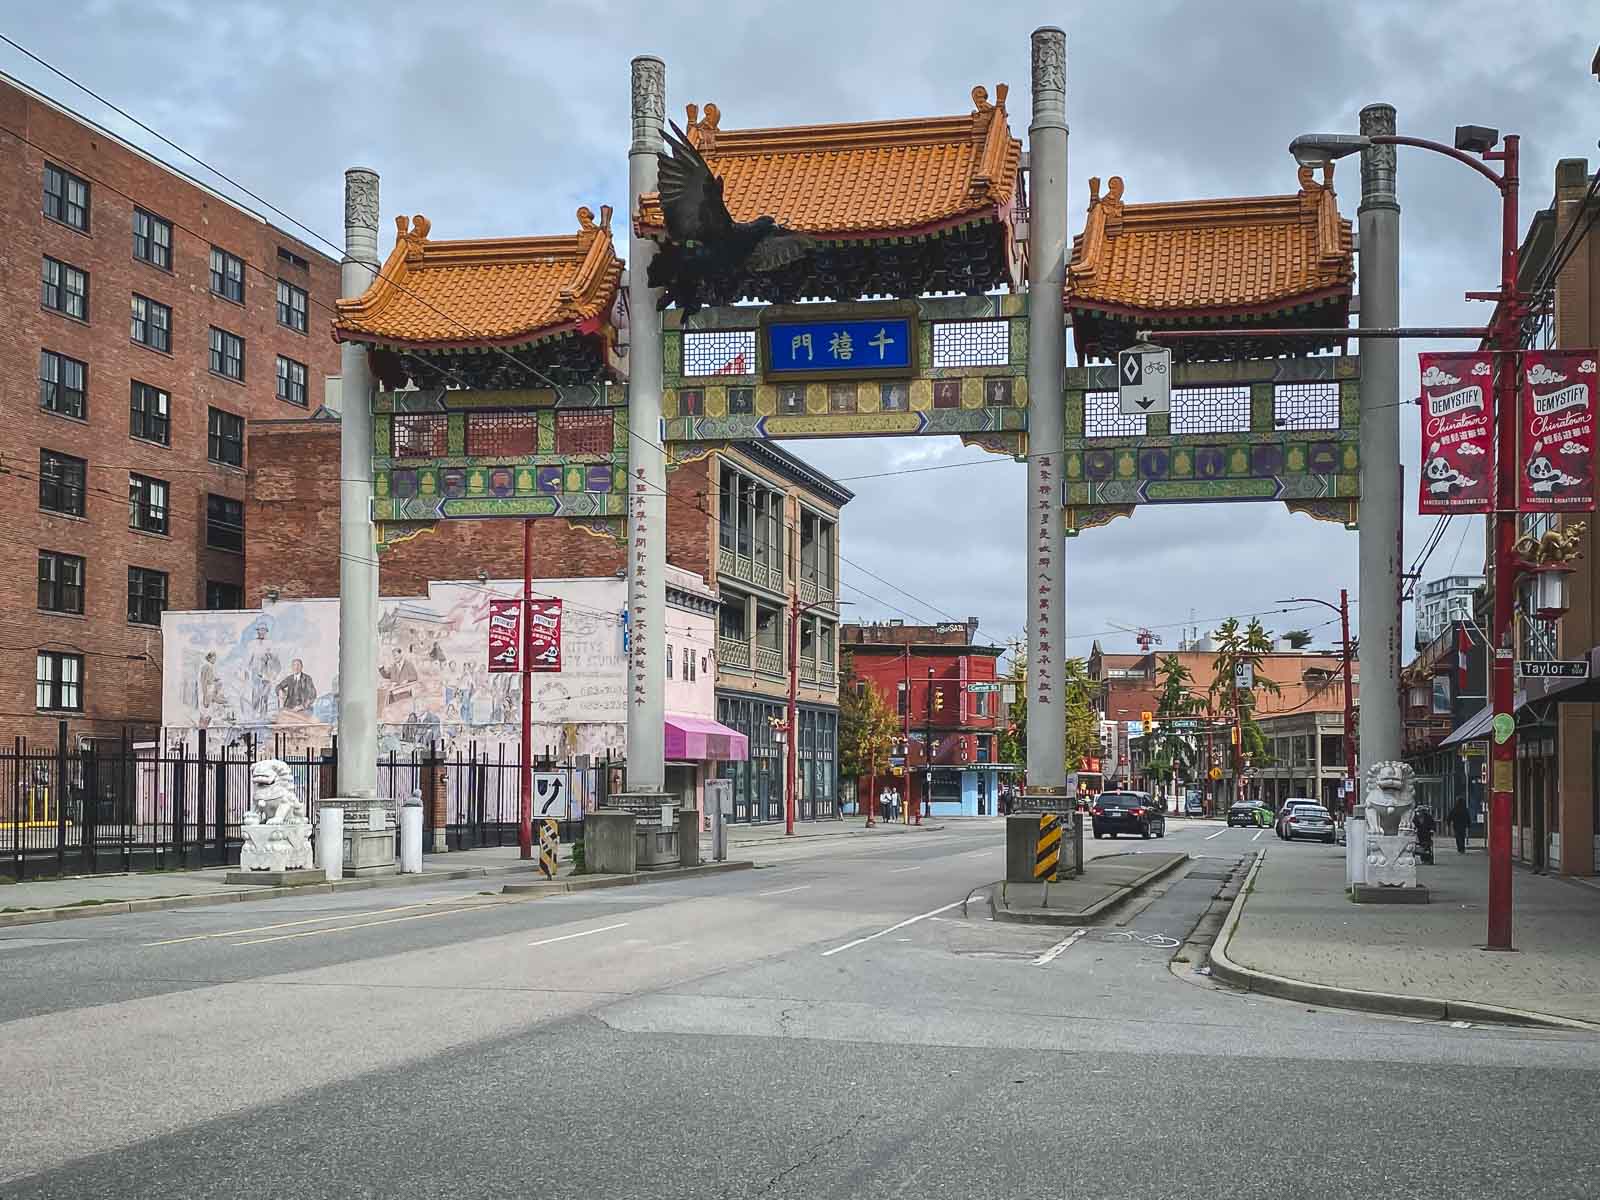 Things to see in Vancouver Canada Chinatown